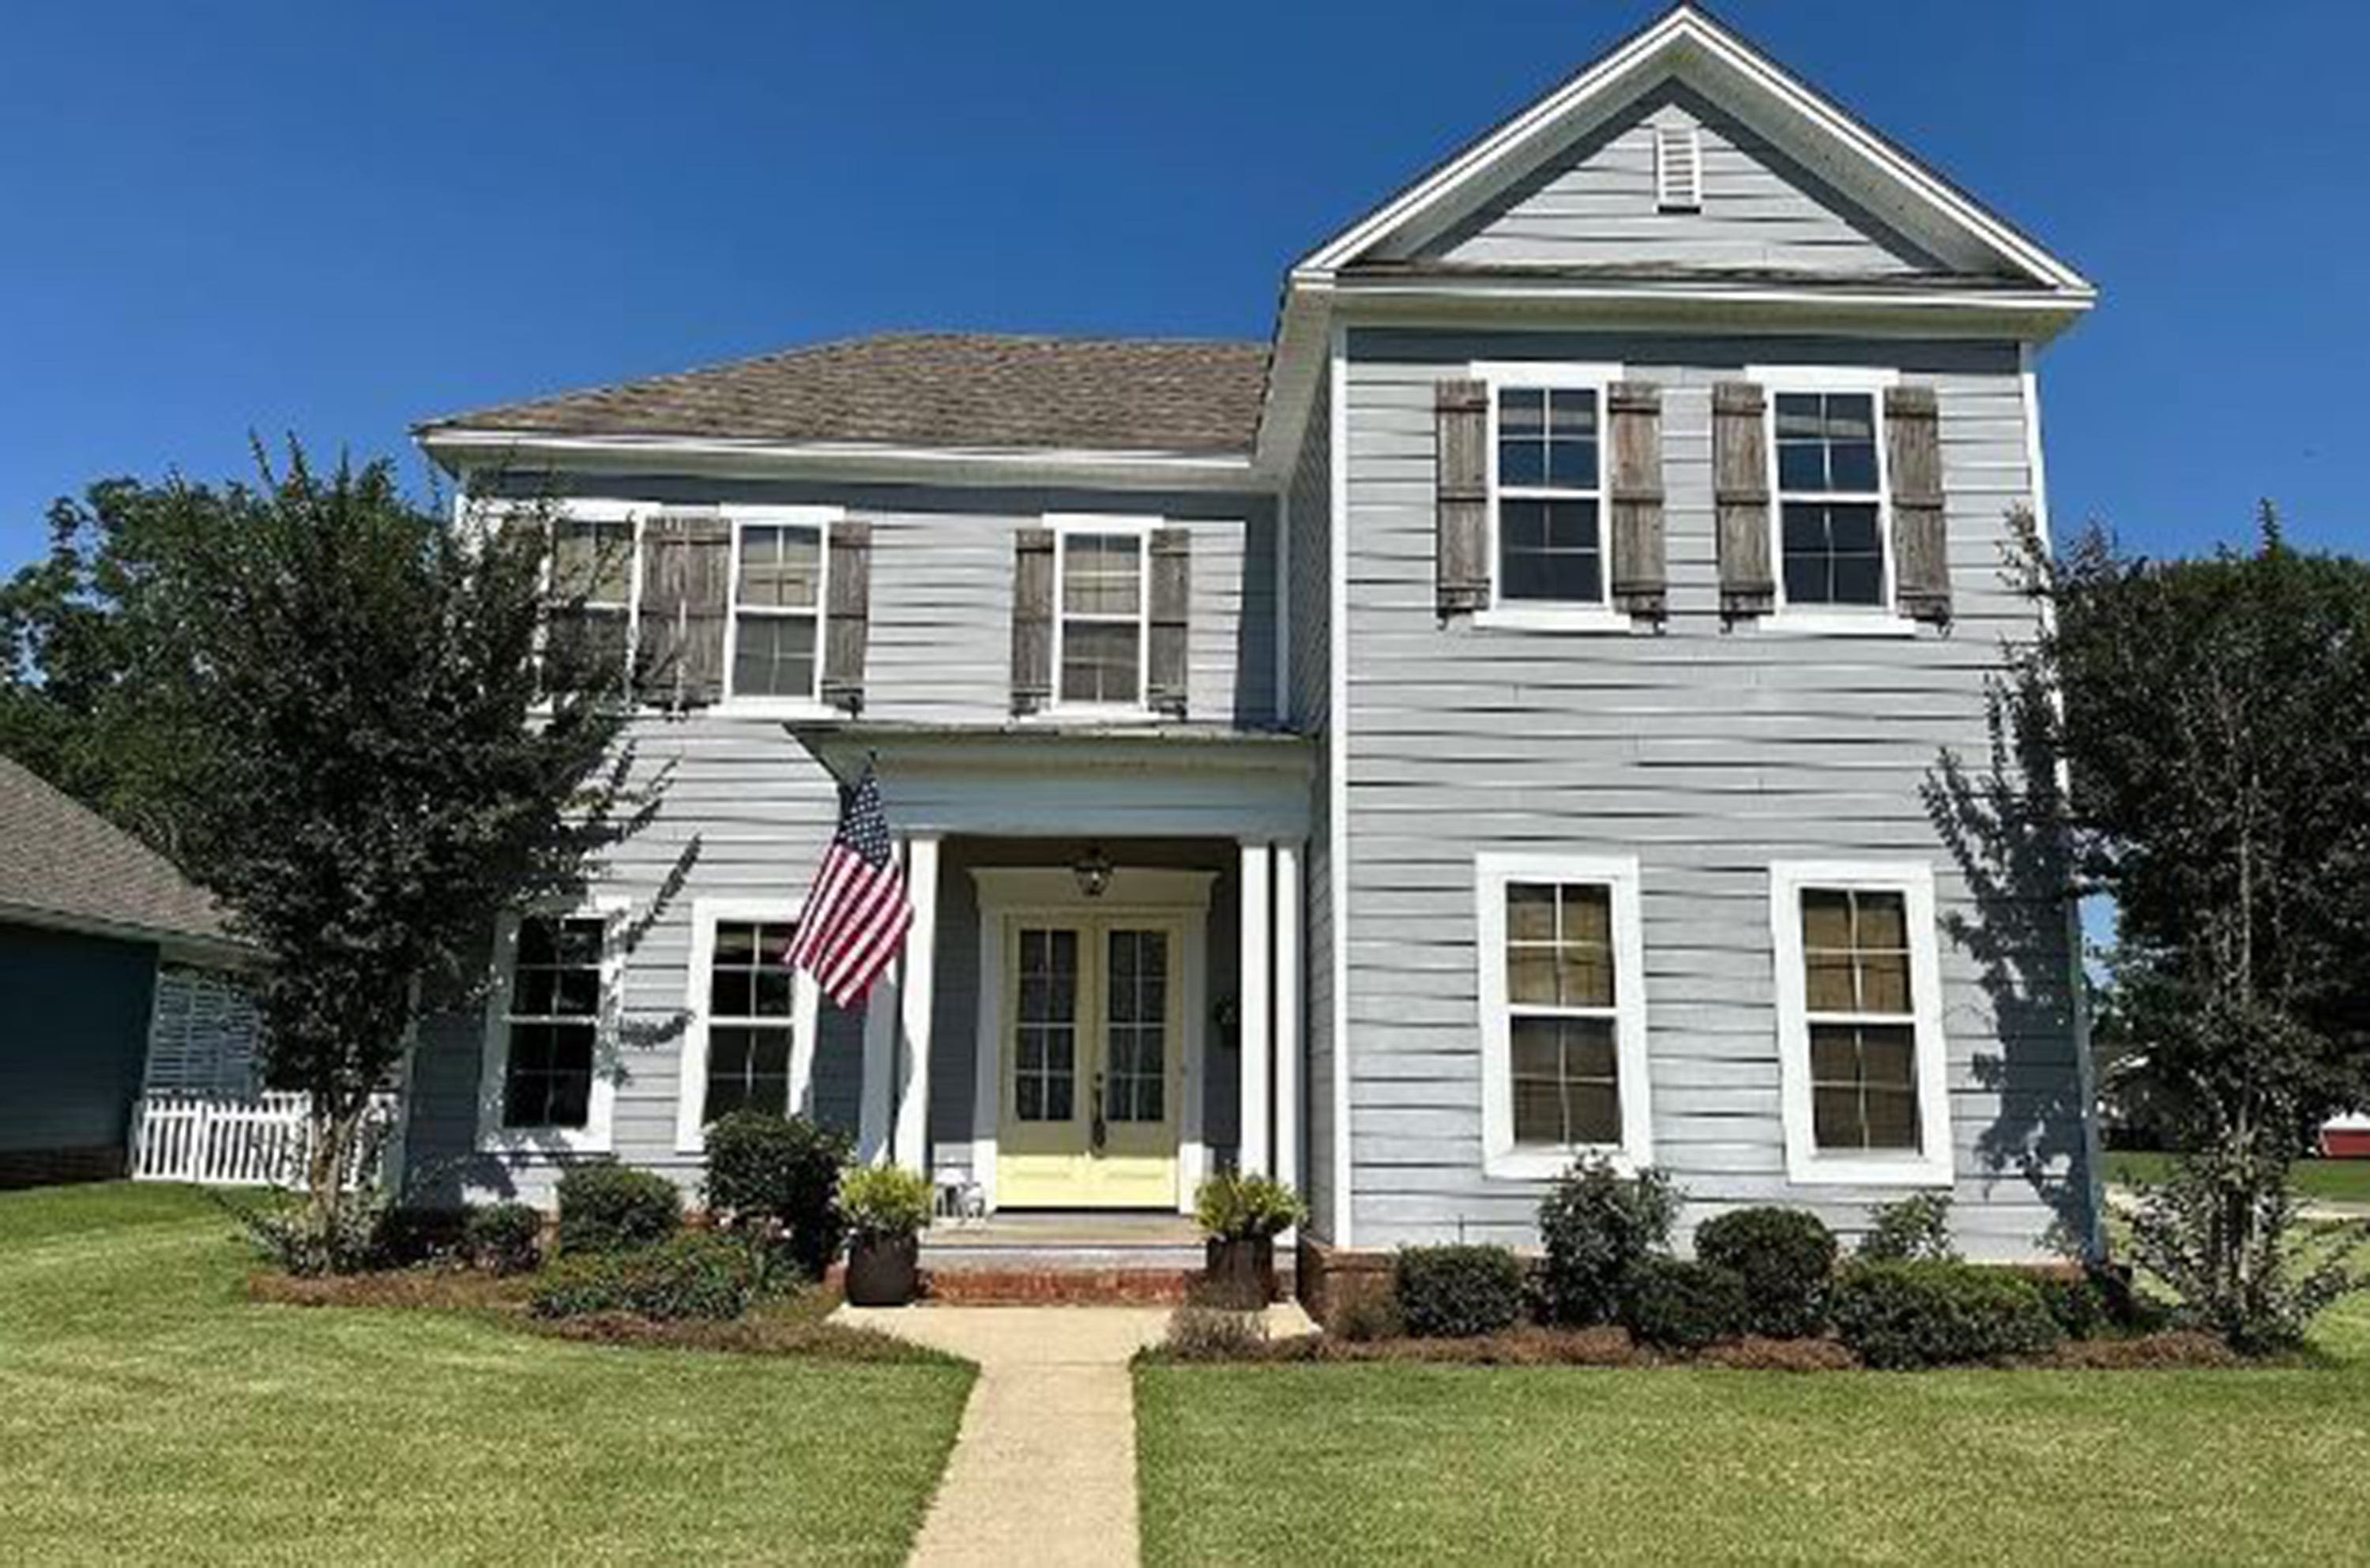 Dream kitchen, four bedrooms await in newer home for sale in Prattville’s Pointe Comfort | REAL ESTATE